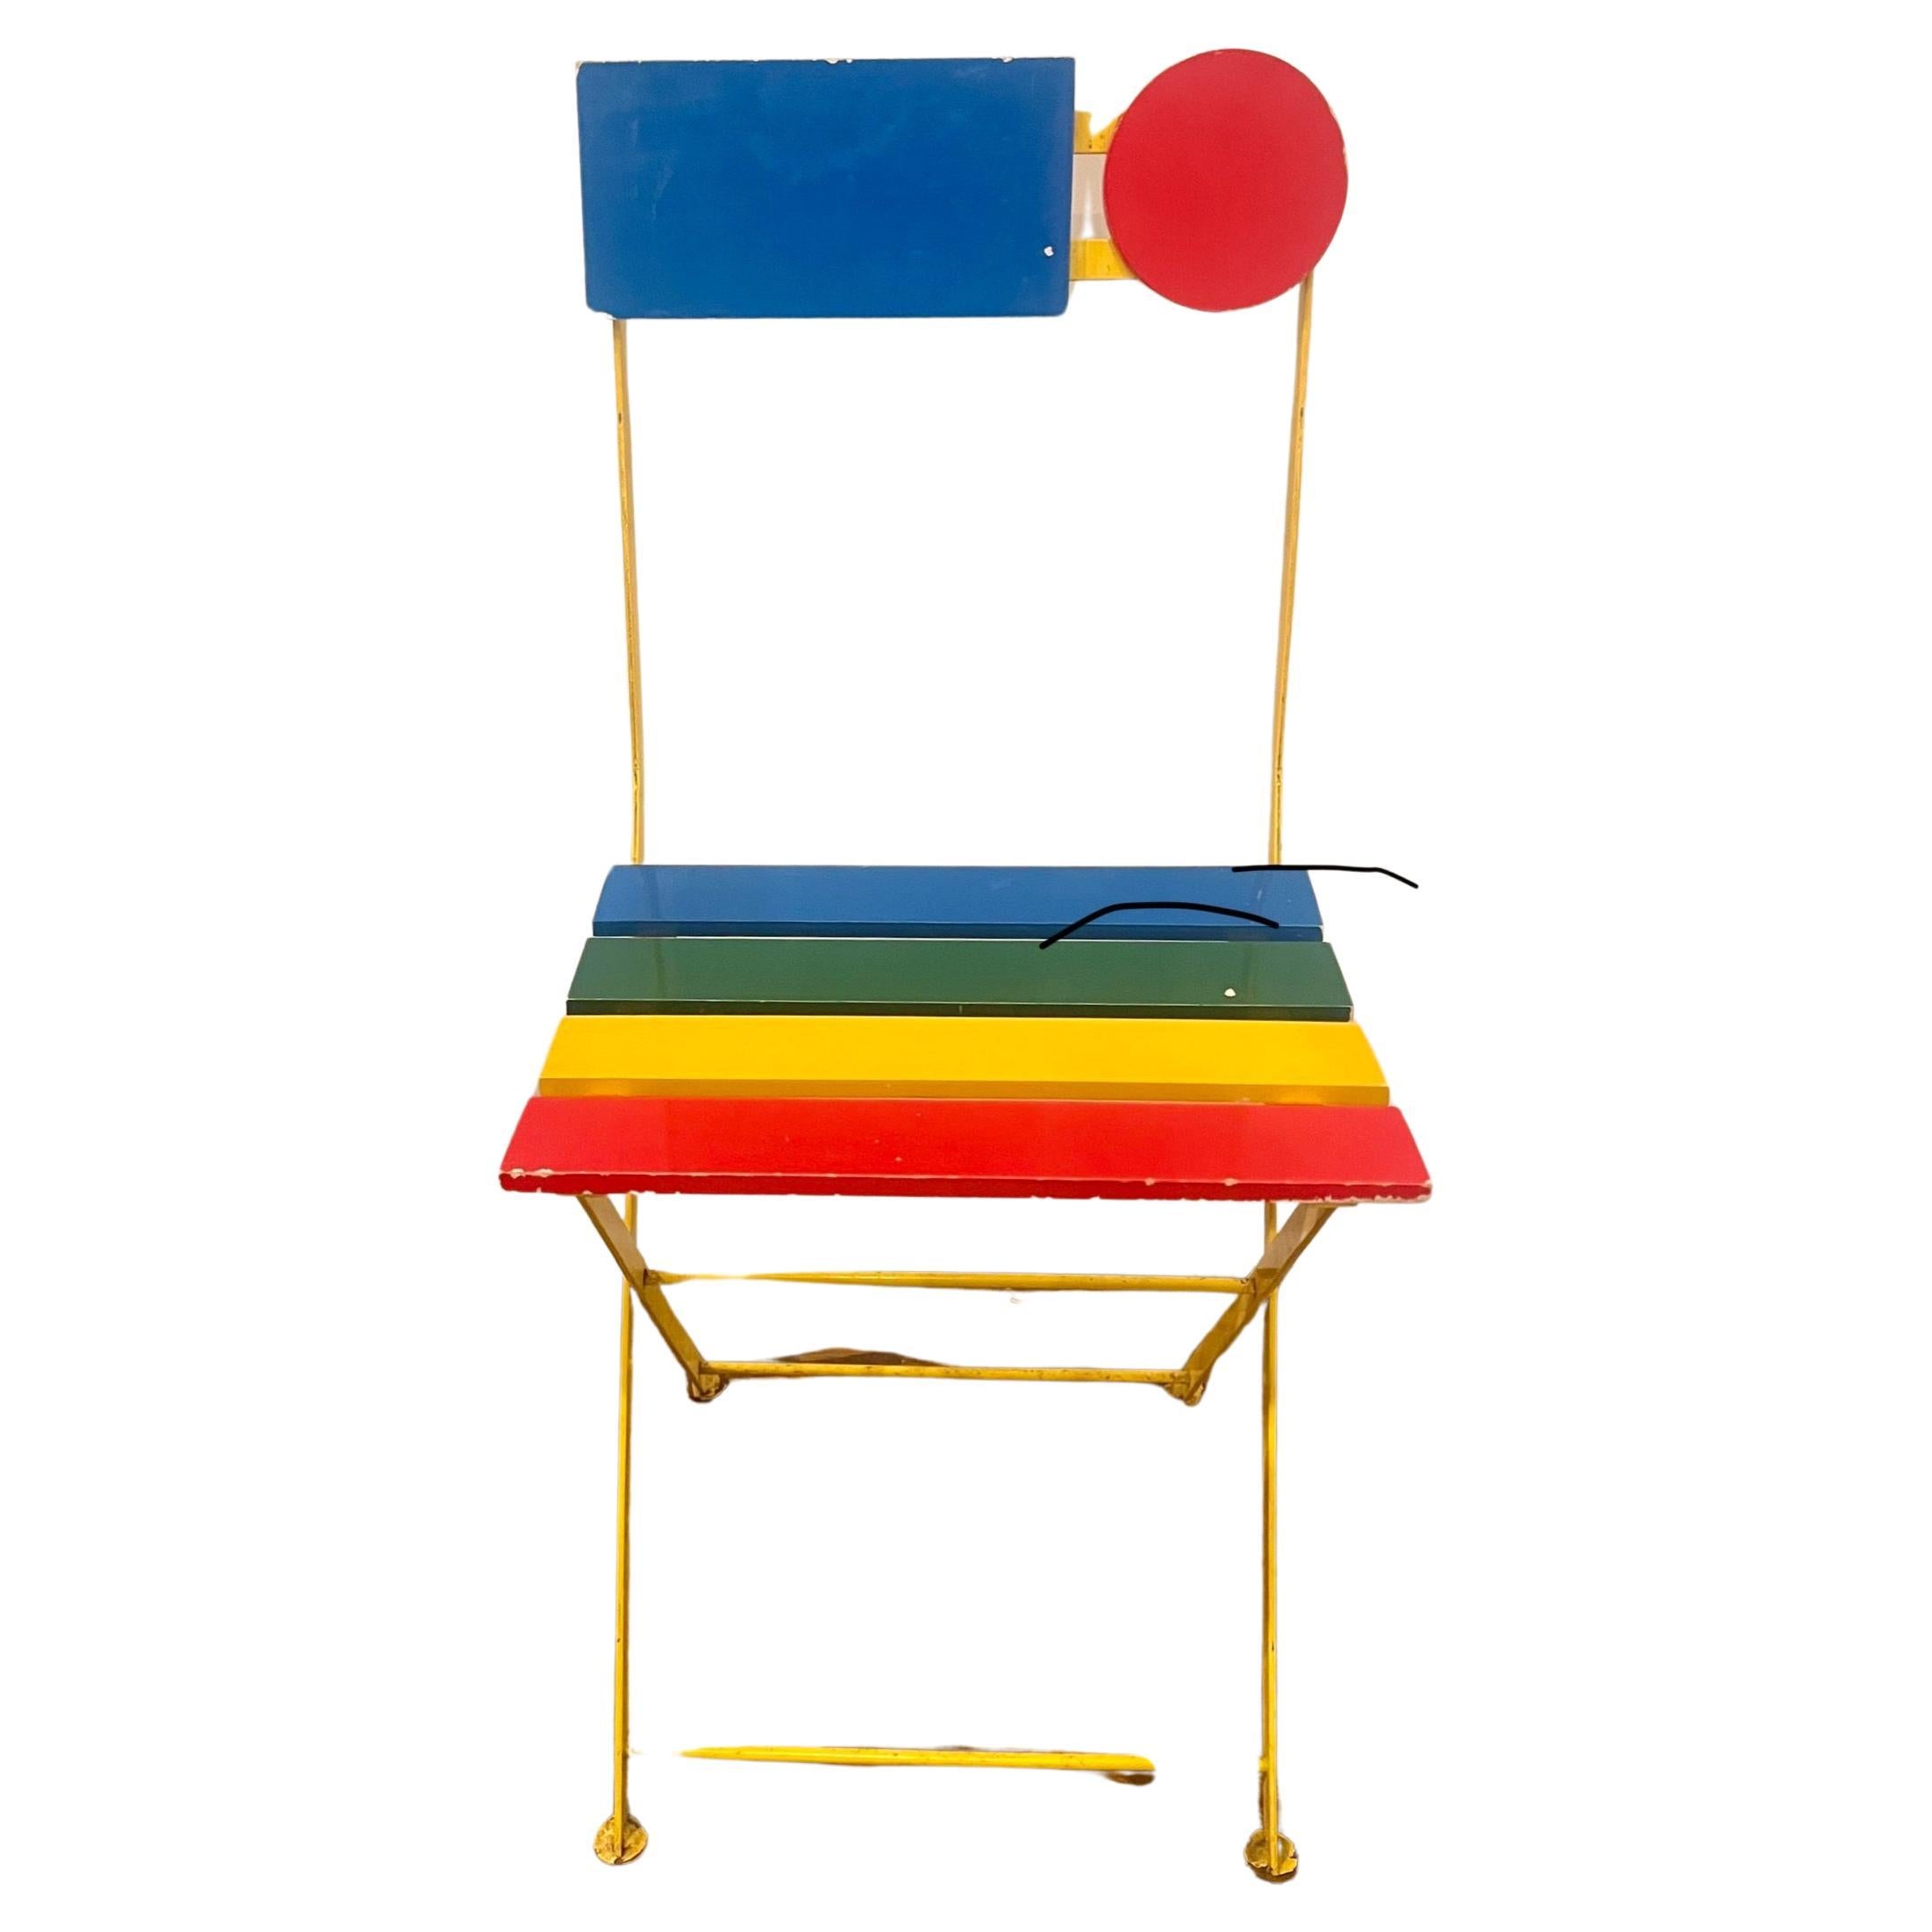 1985 Rare Postmodern Side Chair by Denis Balland For Fermob France For Sale